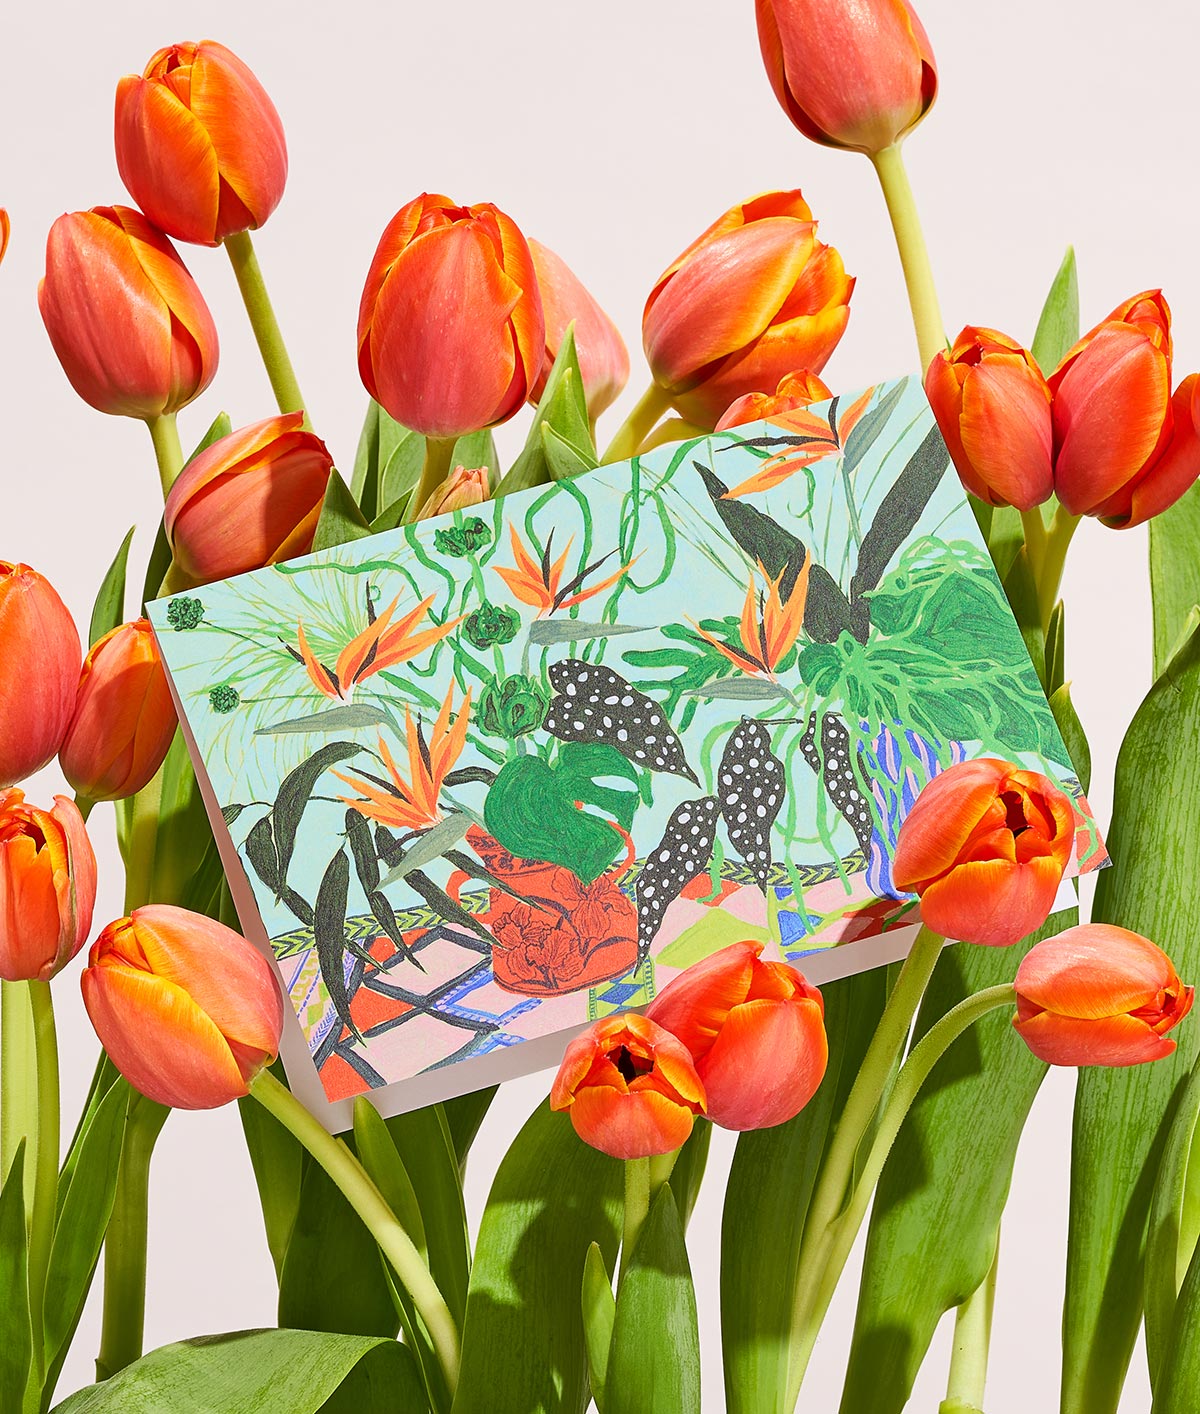 an everyday greetings card with pot plants and flowers on it sitting in a bunch of tulips